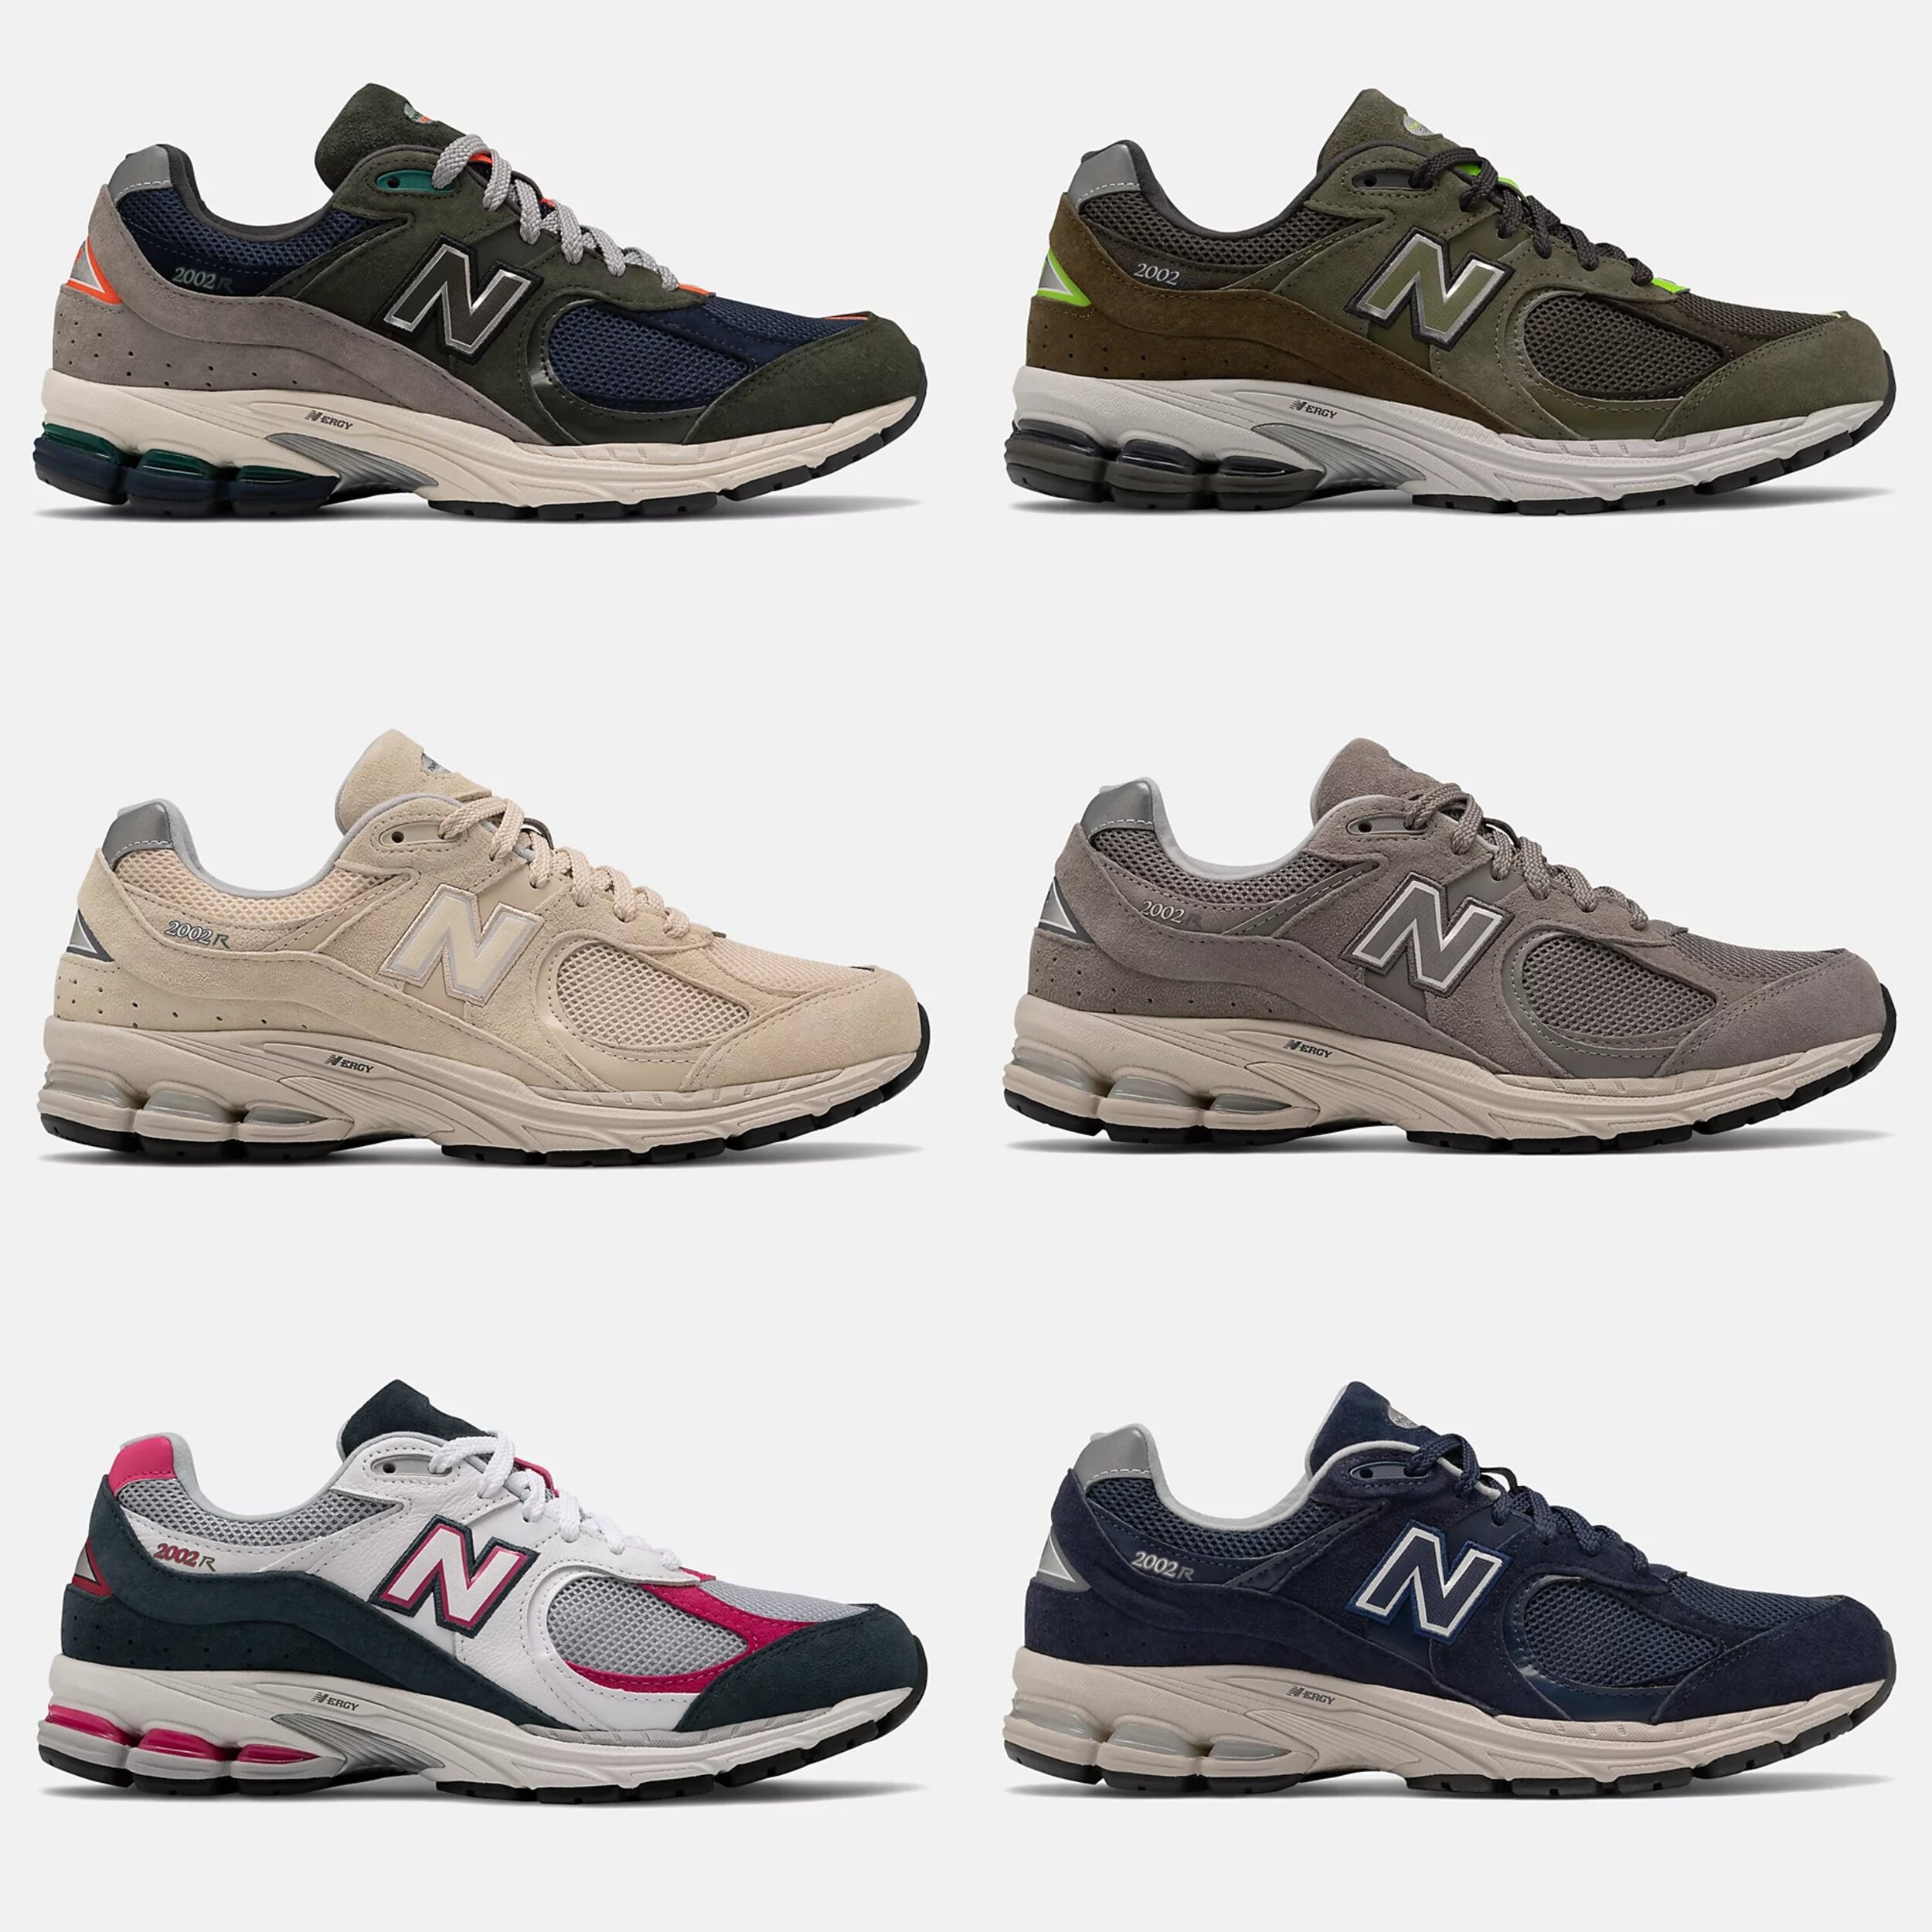 Now Available: New Balance 2002R Colorways — Sneaker Shouts